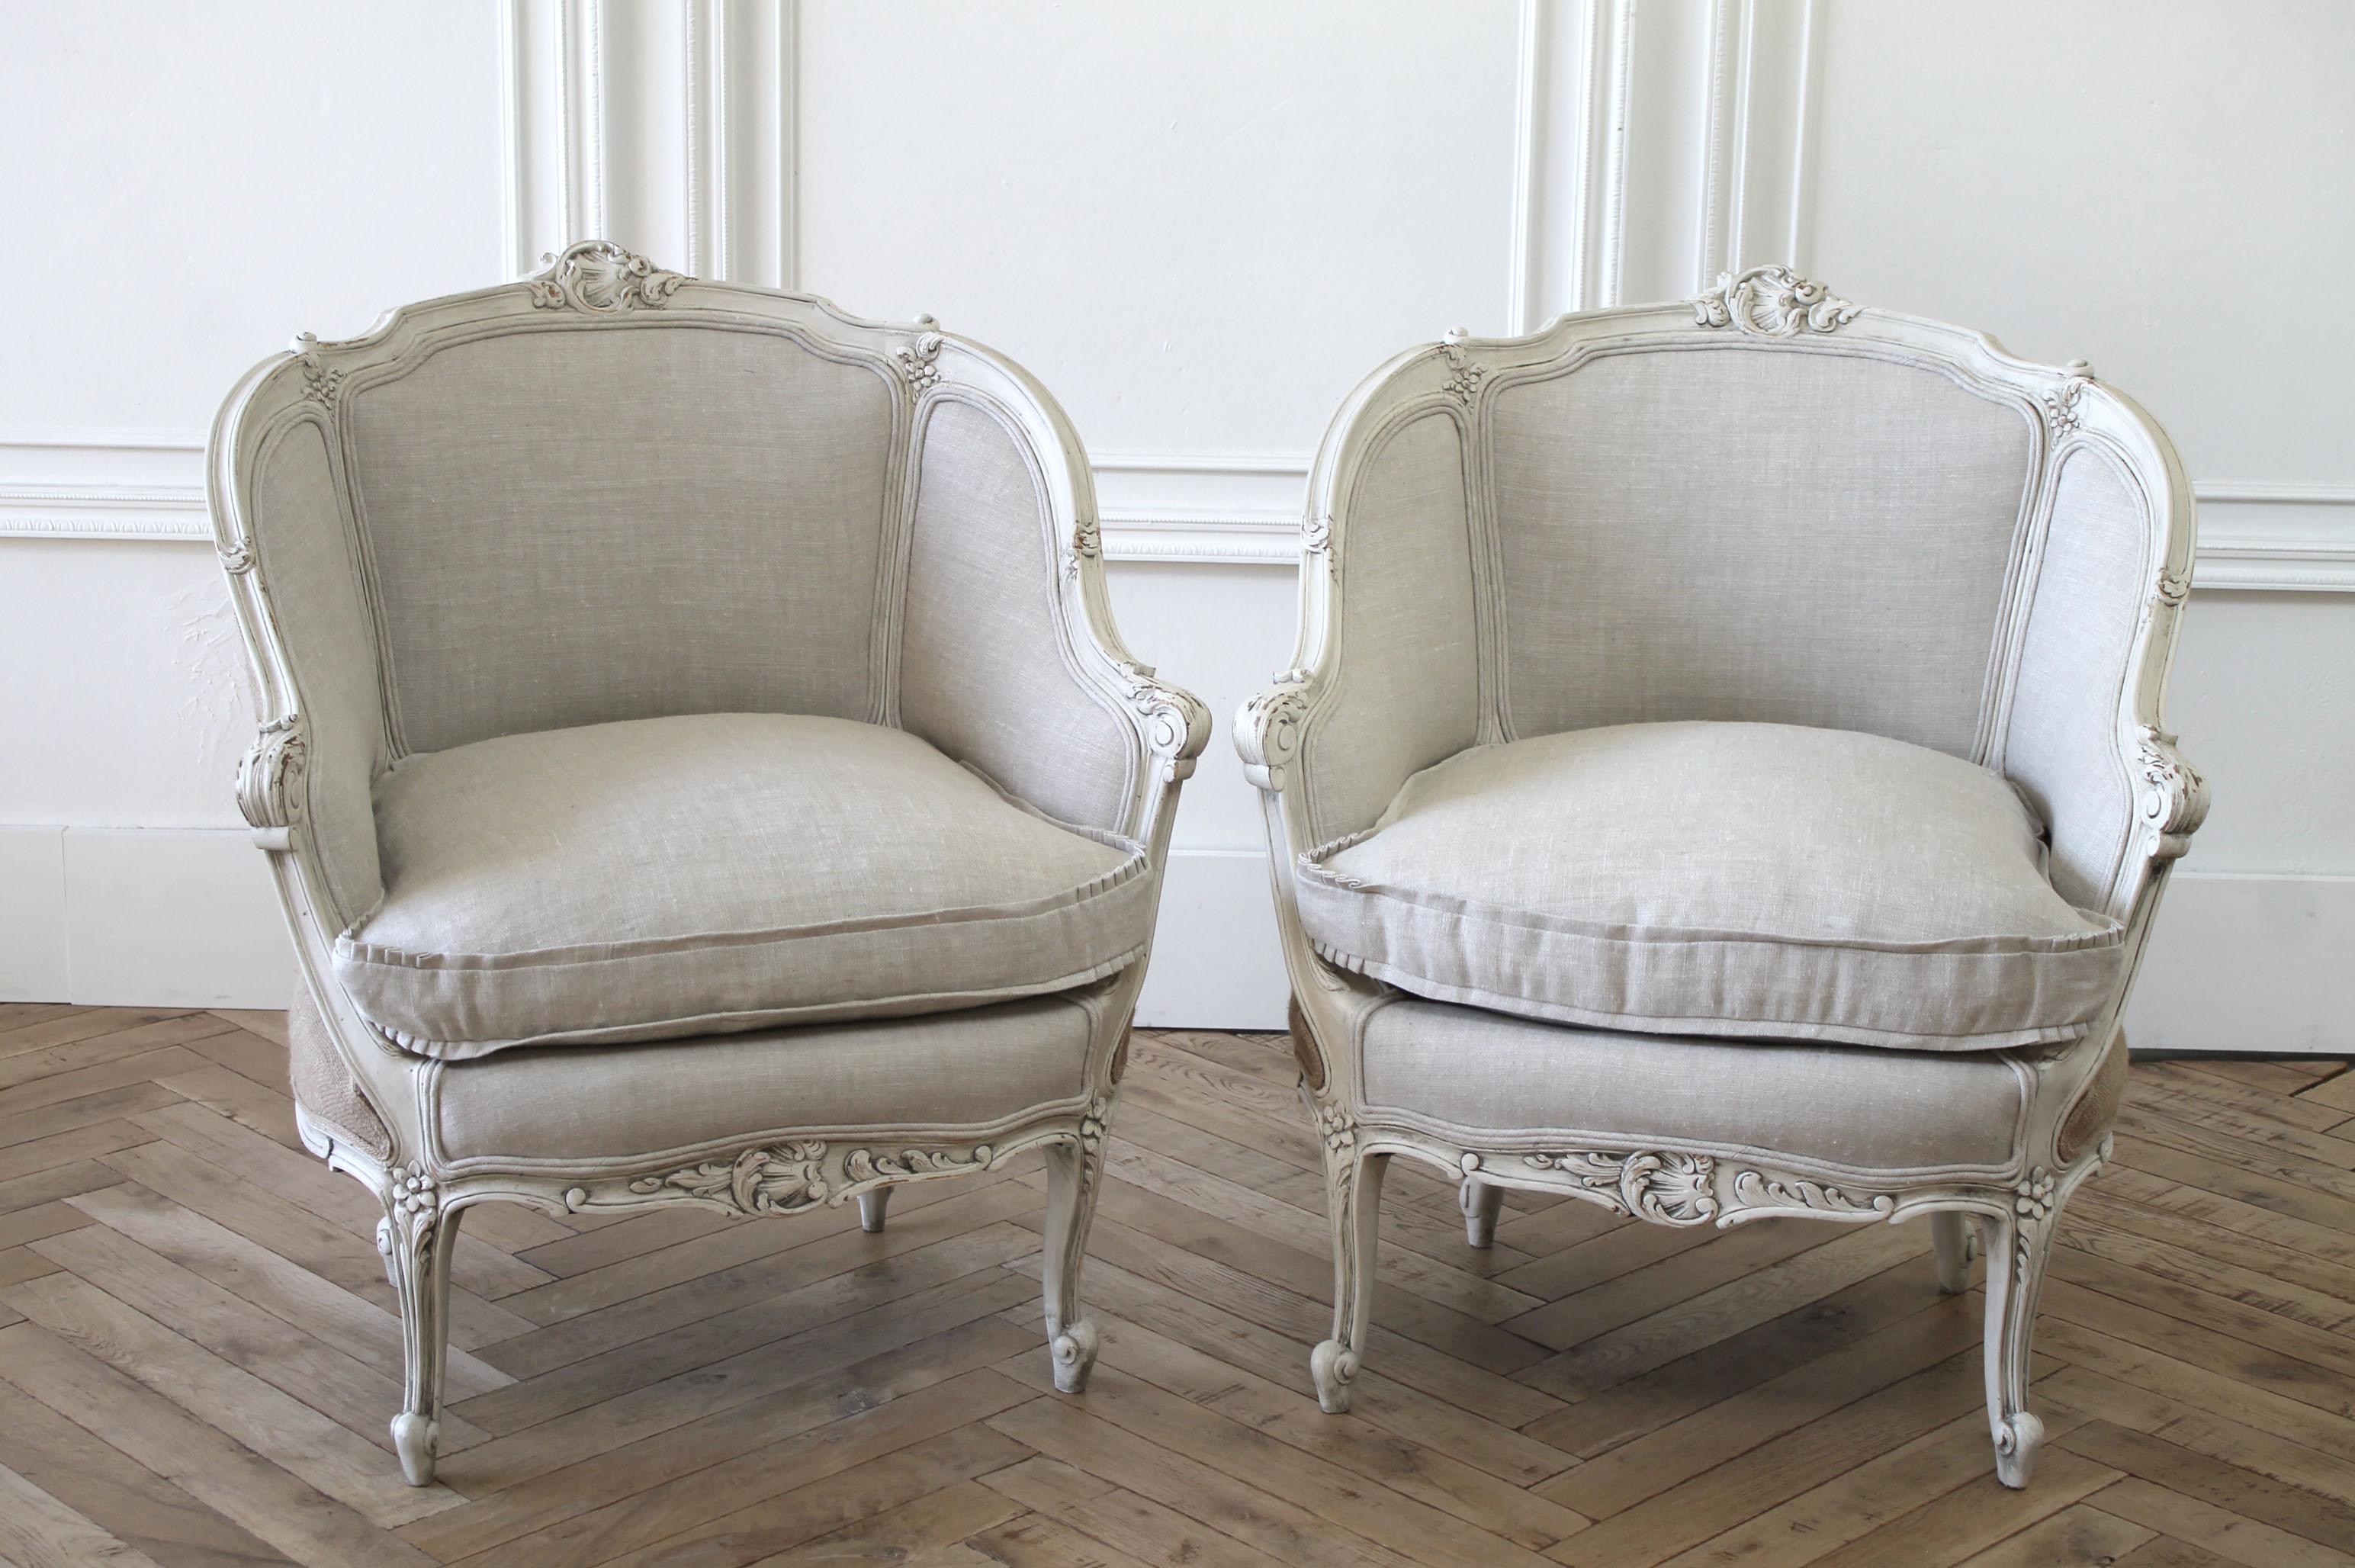 Pair of vintage painted and upholstered French style Marquis chairs in Linen
Painted in a pretty off white, with subtle distressed edges, and antique patina, these chairs have bee reupholstered in a beautiful natural Belgian linen. New down wrapped